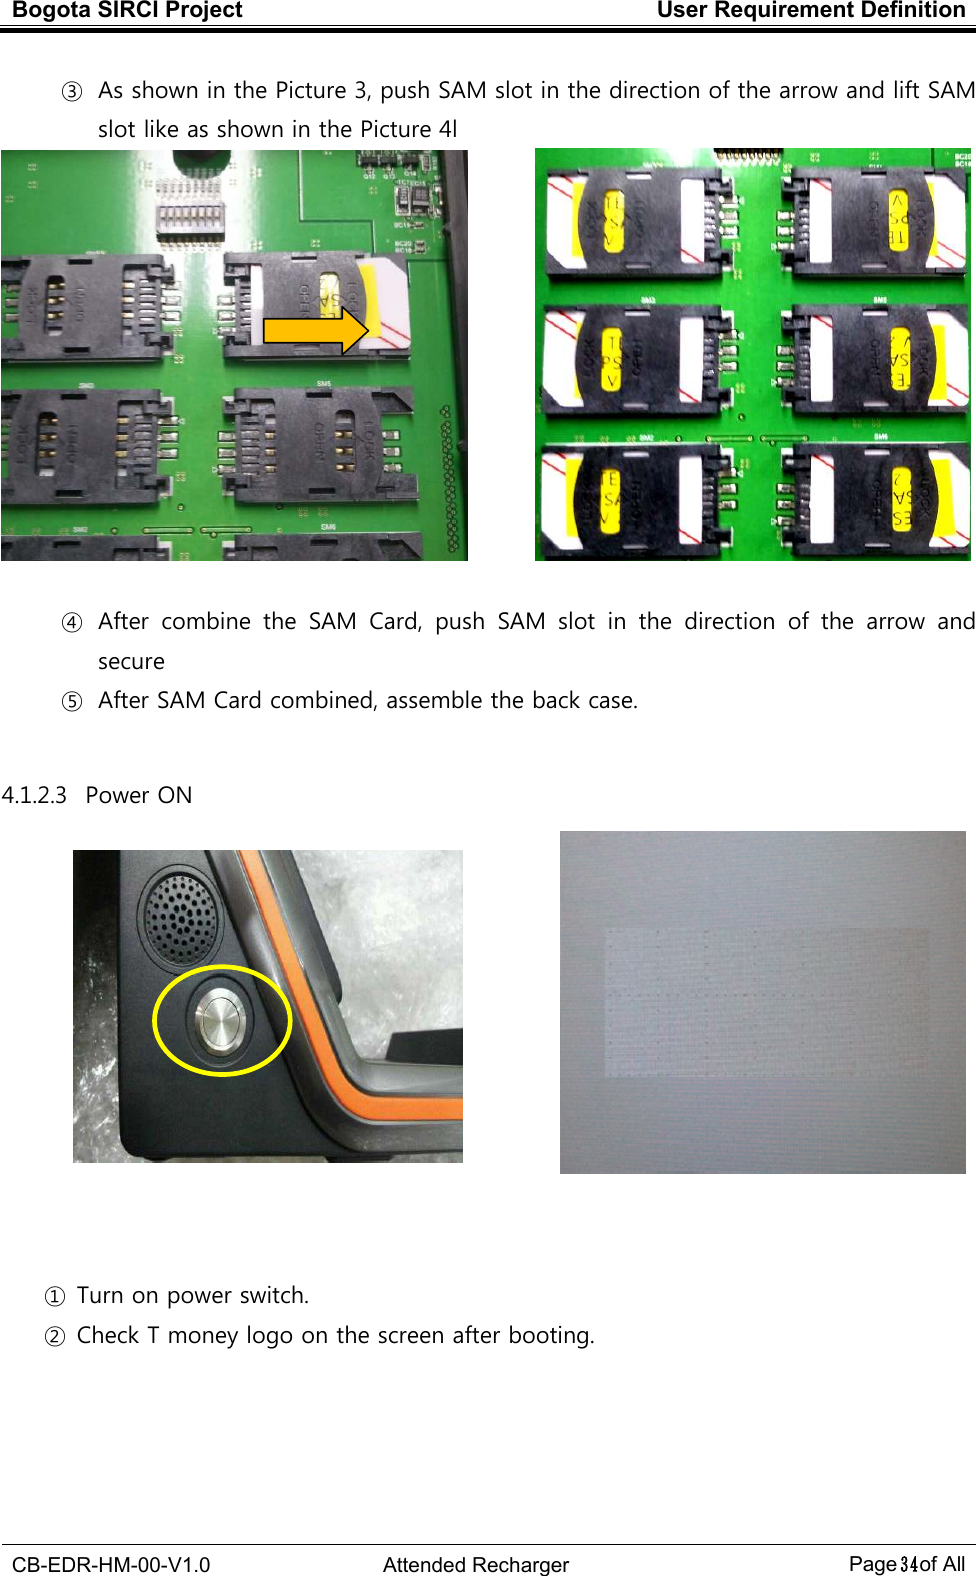 Bogota SIRCI Project  User Requirement Definition  CB-EDR-HM-00-V1.0  Attended Recharger Page３４ of All  ③ As shown in the Picture 3, push SAM slot in the direction of the arrow and lift SAM slot like as shown in the Picture 4l          ④ After  combine  the  SAM  Card,  push  SAM  slot  in  the  direction  of  the  arrow  and secure ⑤ After SAM Card combined, assemble the back case.  4.1.2.3   Power ON            ① Turn on power switch. ② Check T money logo on the screen after booting.    